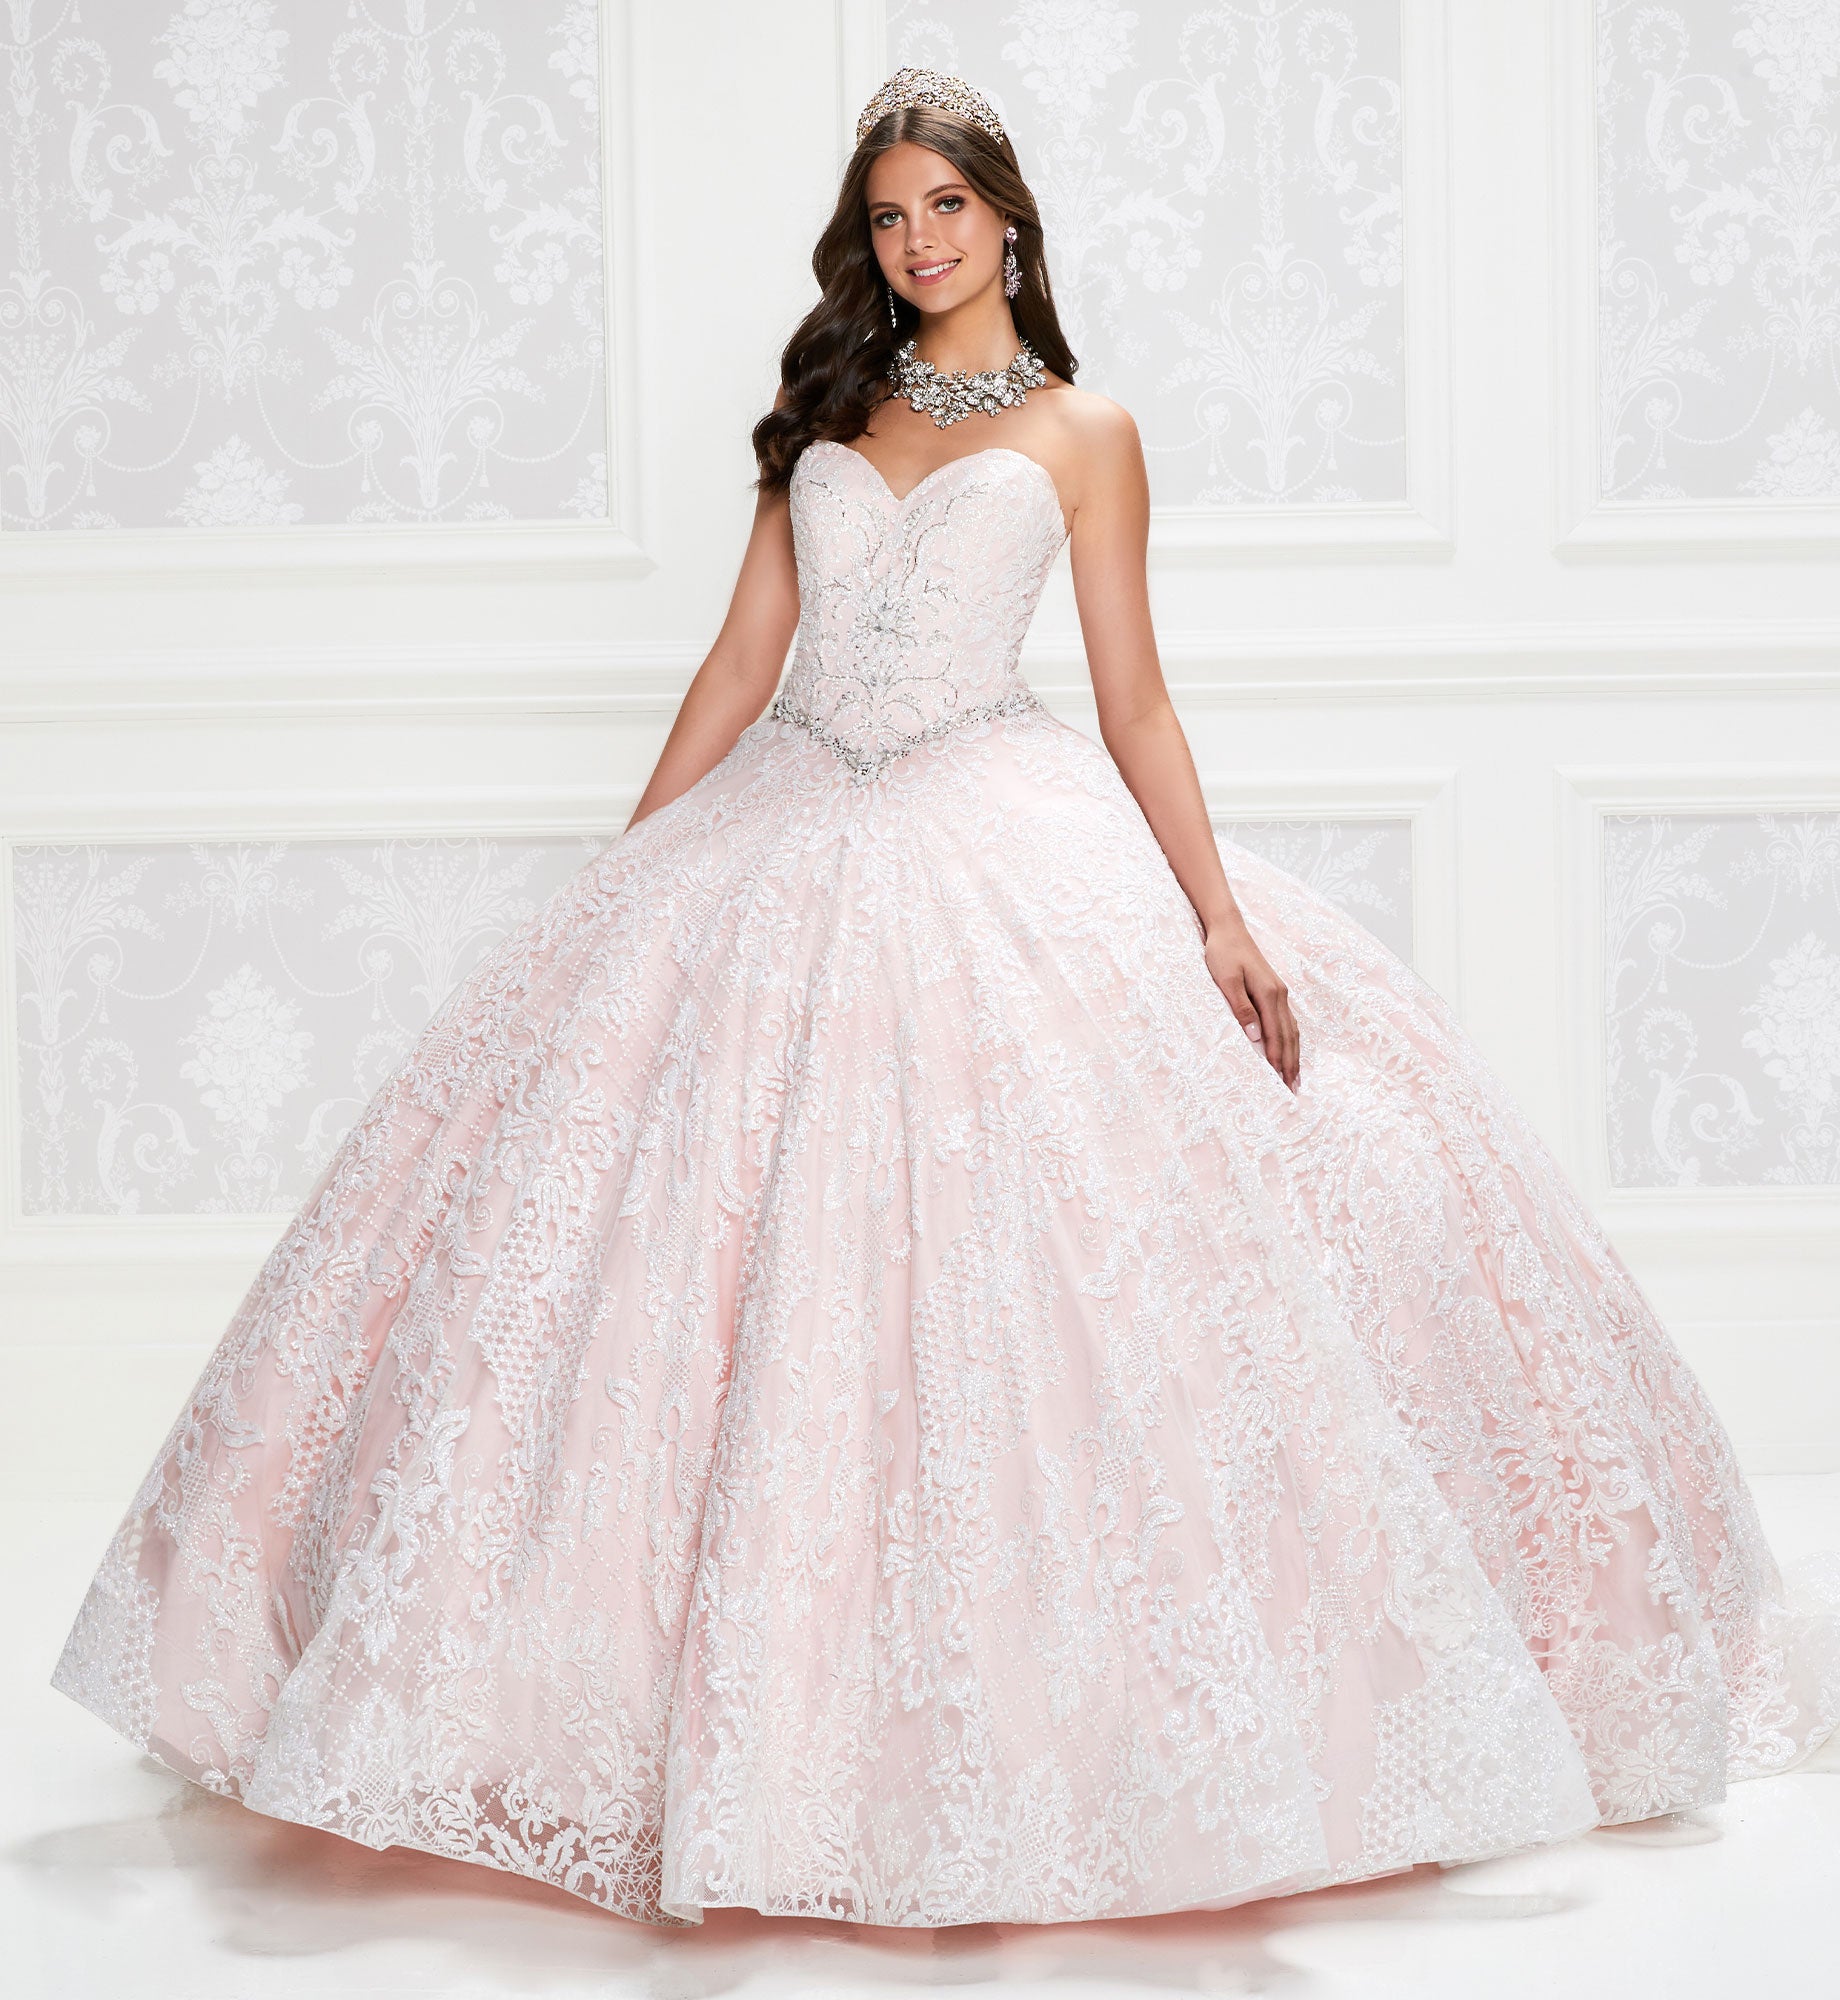 Pastel quinceanera dress with cracked ice details and pockets